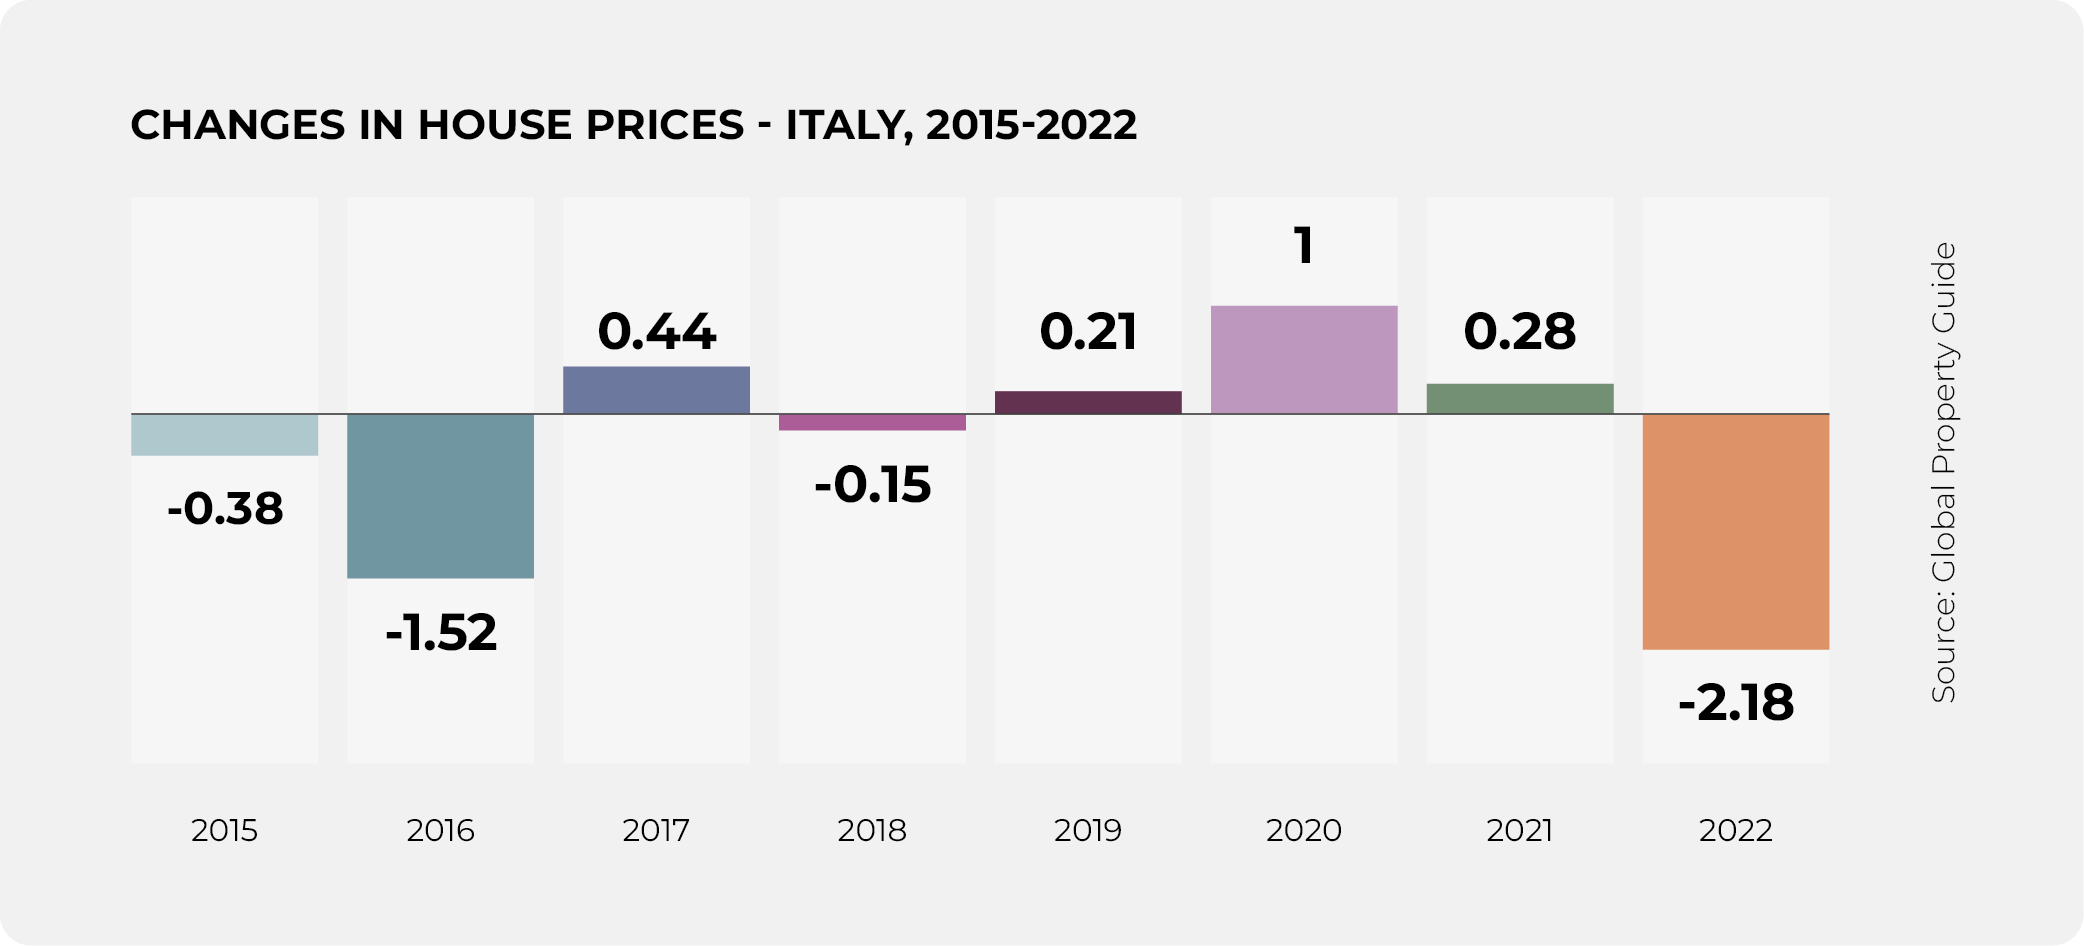 Changes in house prices, Italy, 2015-2022